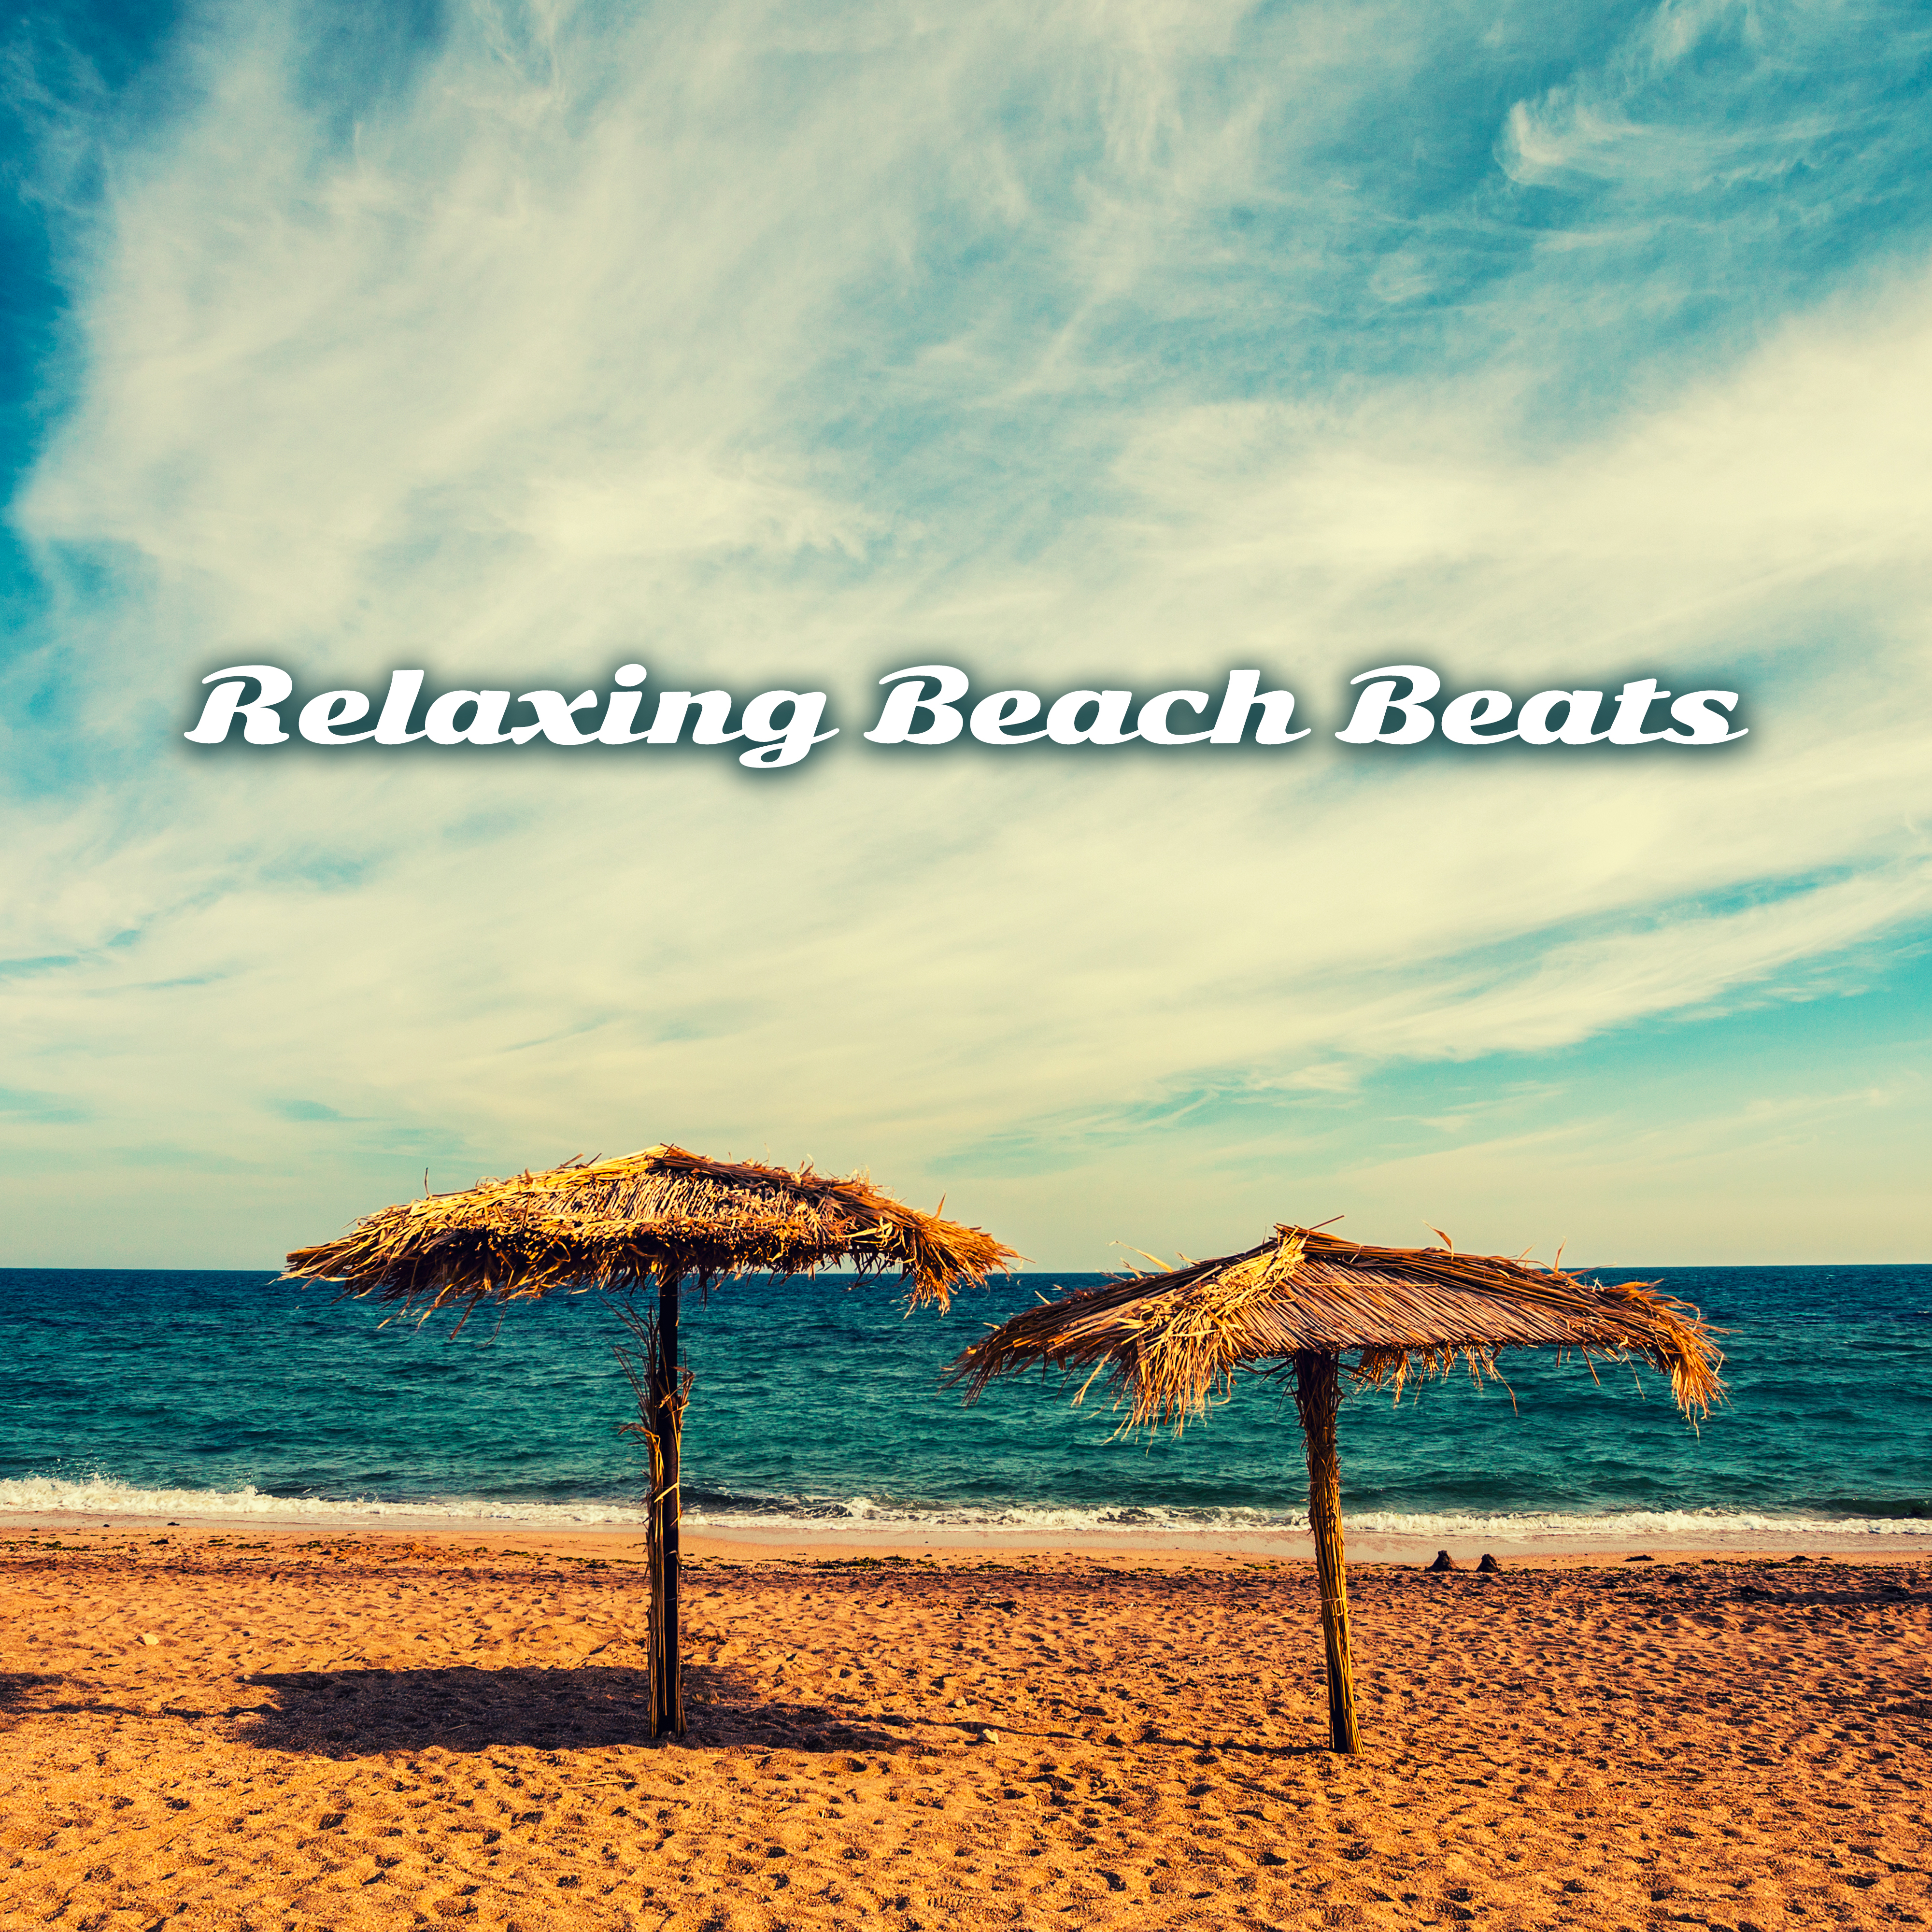 Relaxing Beach Beats – Calm Summer Chill Out, Music to Relax, Holiday Sun, Beach Cocktails